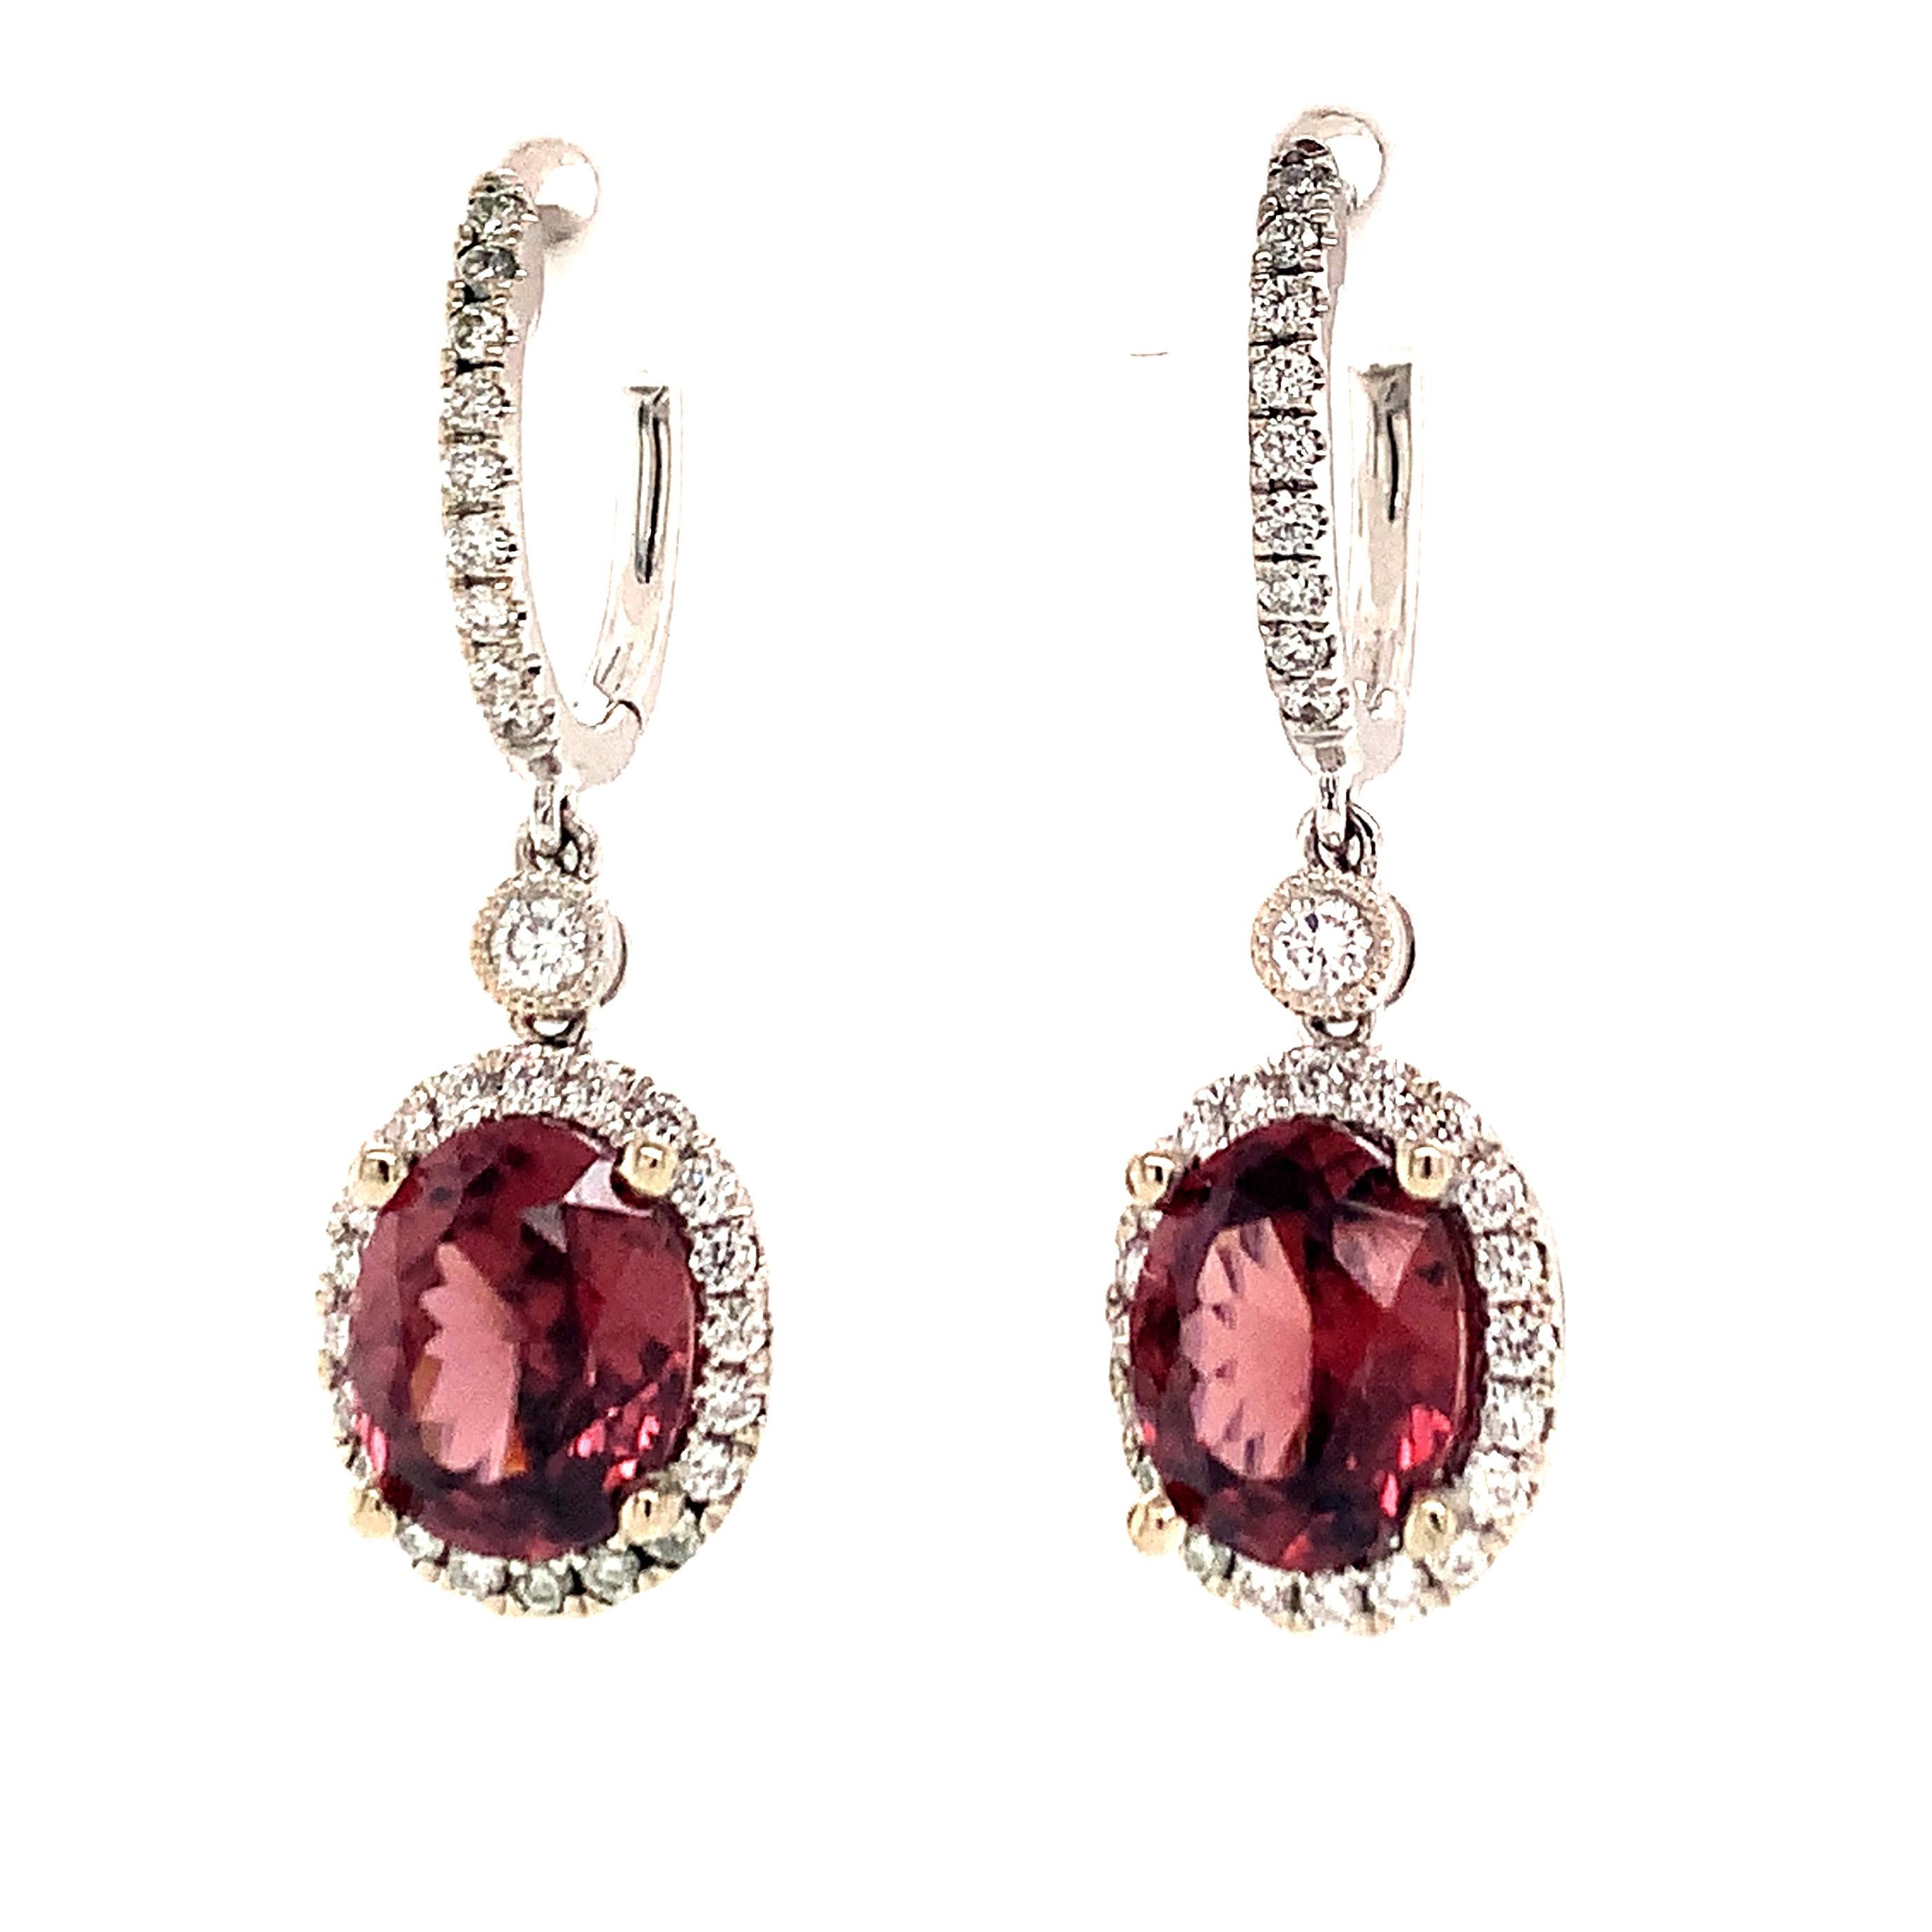 Oval Cut Natural Tourmaline Rubellite Diamond Earrings 18k Gold 6.62 TCW Certified For Sale